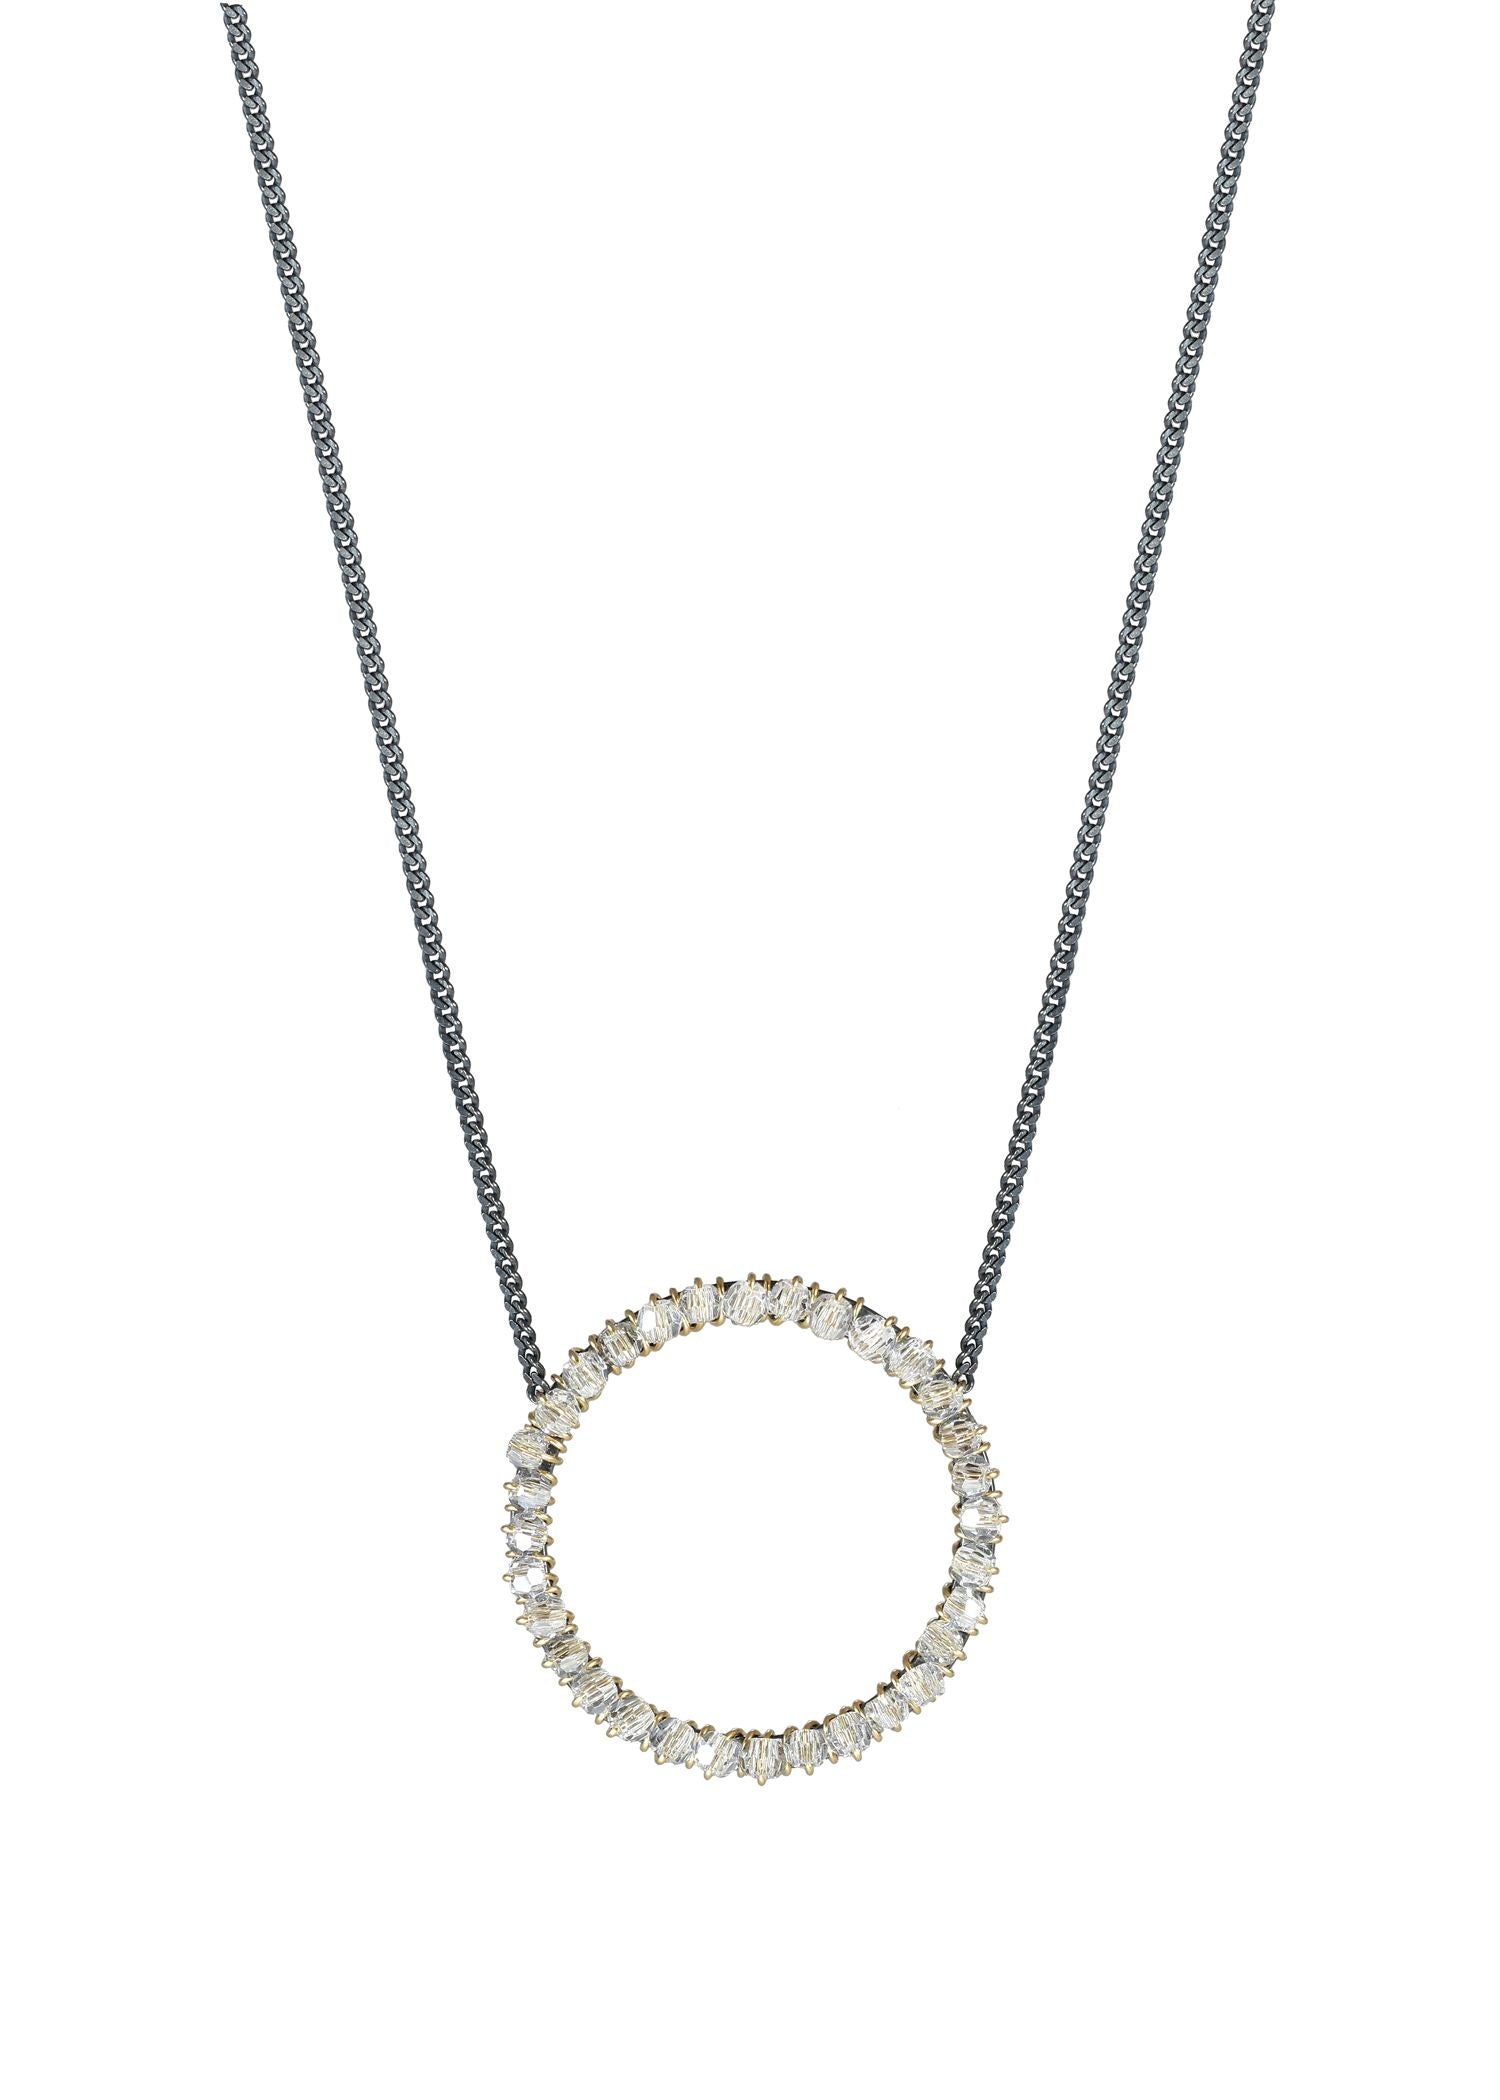 Crystal 14k gold fill Blackened sterling silver Mixed metal Necklace measures 16" in length Pendant measures 13/16" in diameter Handmade in our Los Angeles studio